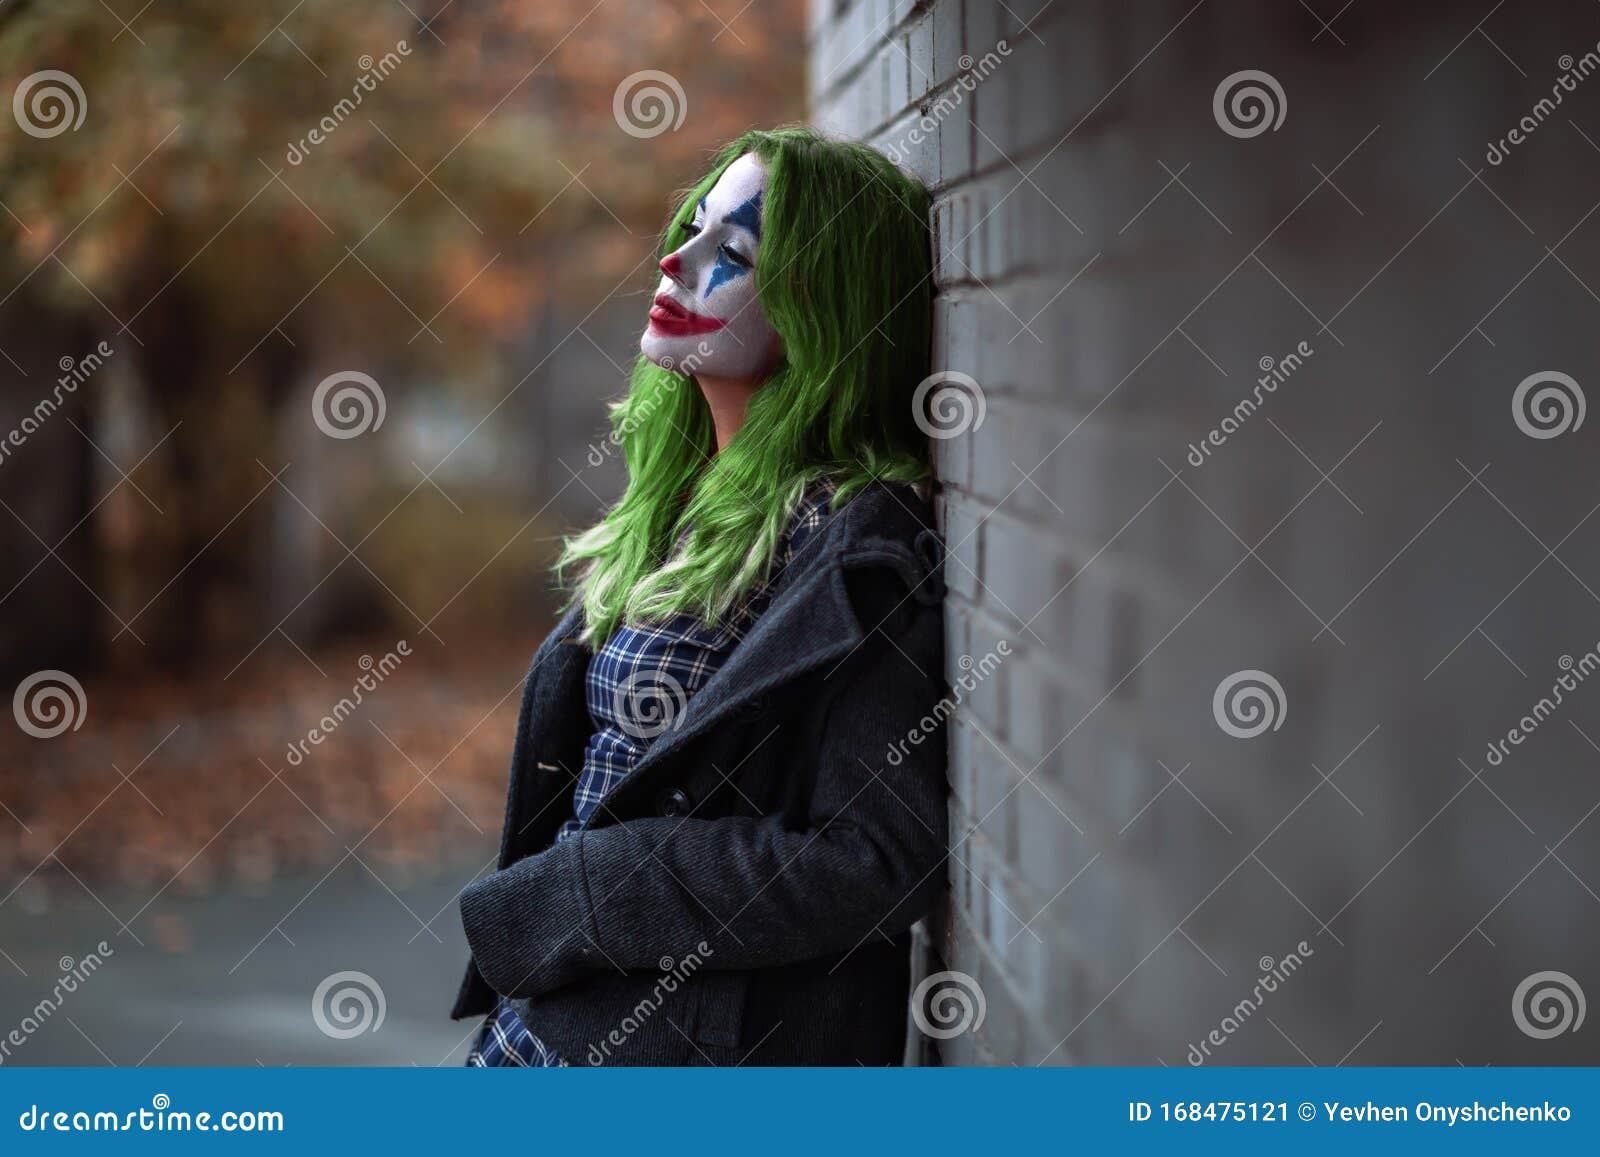 Portrait of a Greenhaired Girl in Chekered Dress with Joker Makeup ...